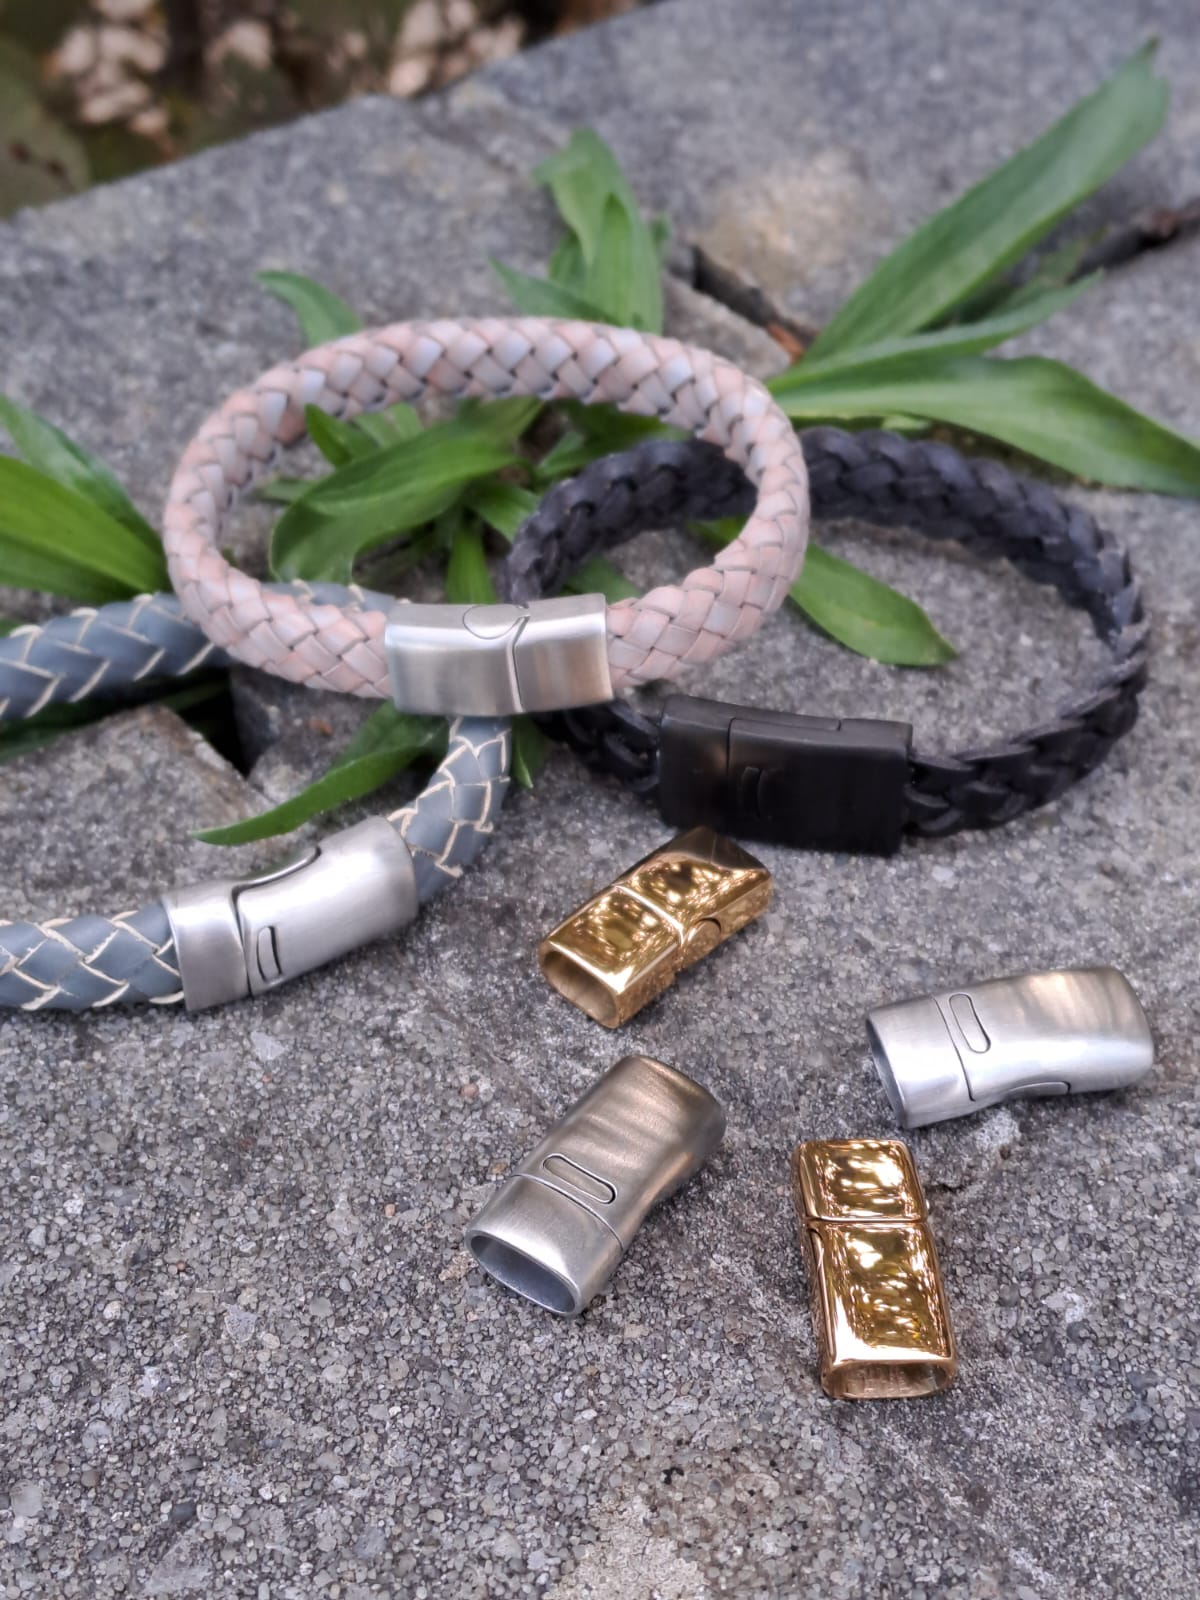 How to make a leather bracelet with magnetic clasps